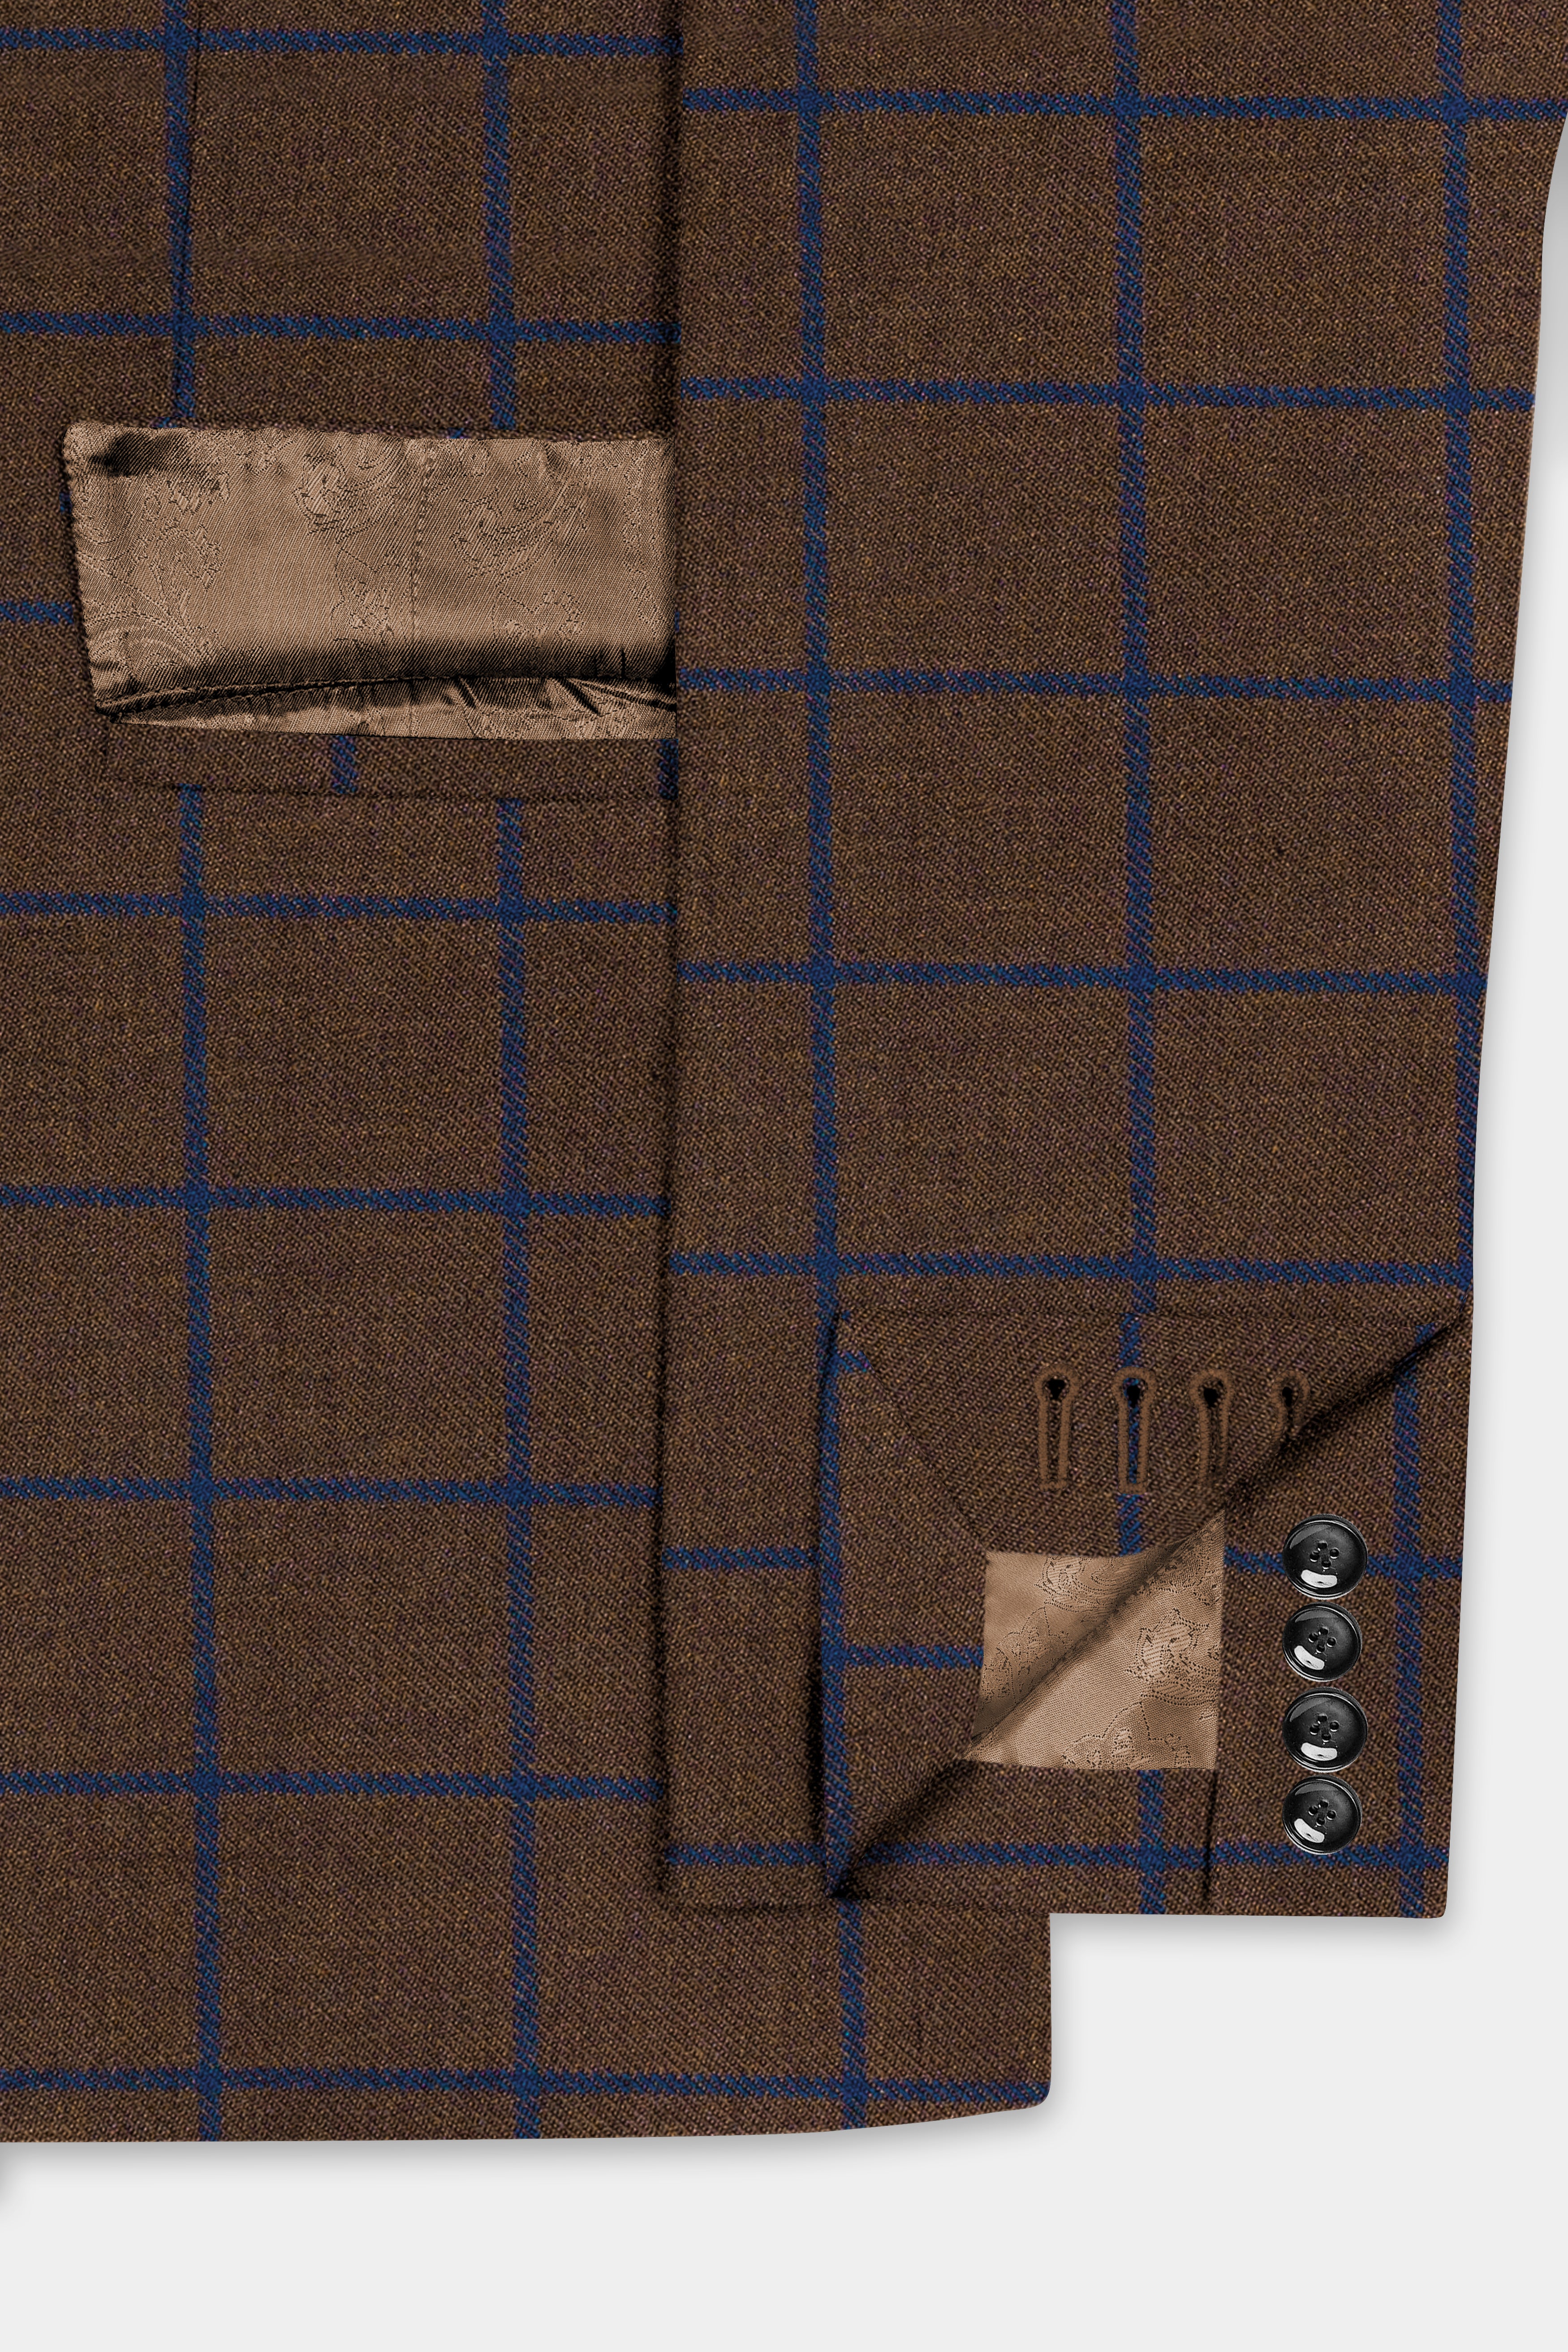 Bistre Brown with Catalina Blue Windowpane Double Breasted Tweed Suit